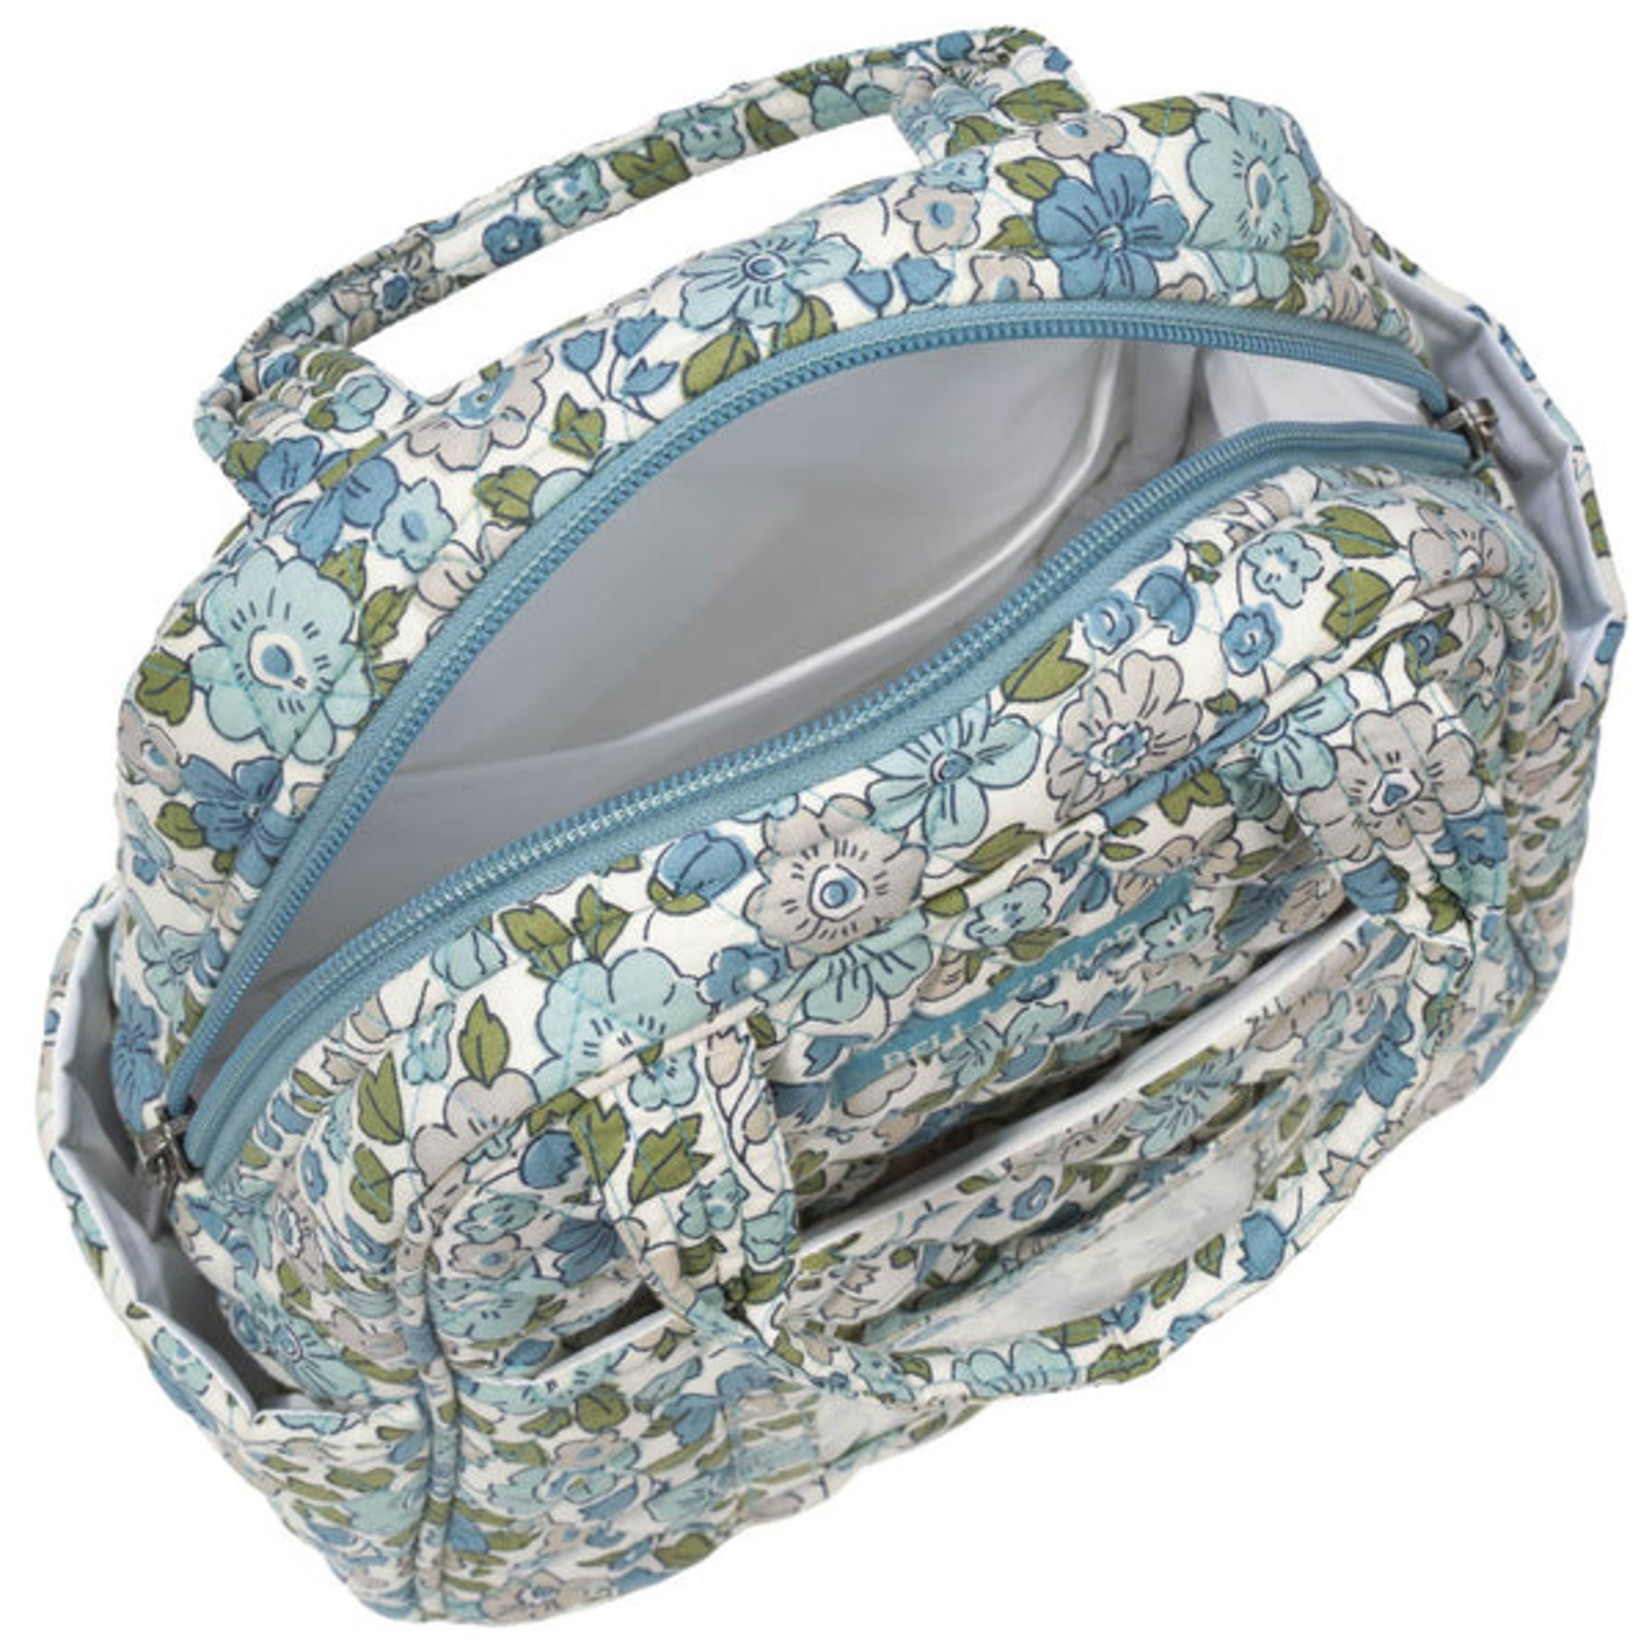 Bella Taylor Delicate Floral Blue - Lunch Tote